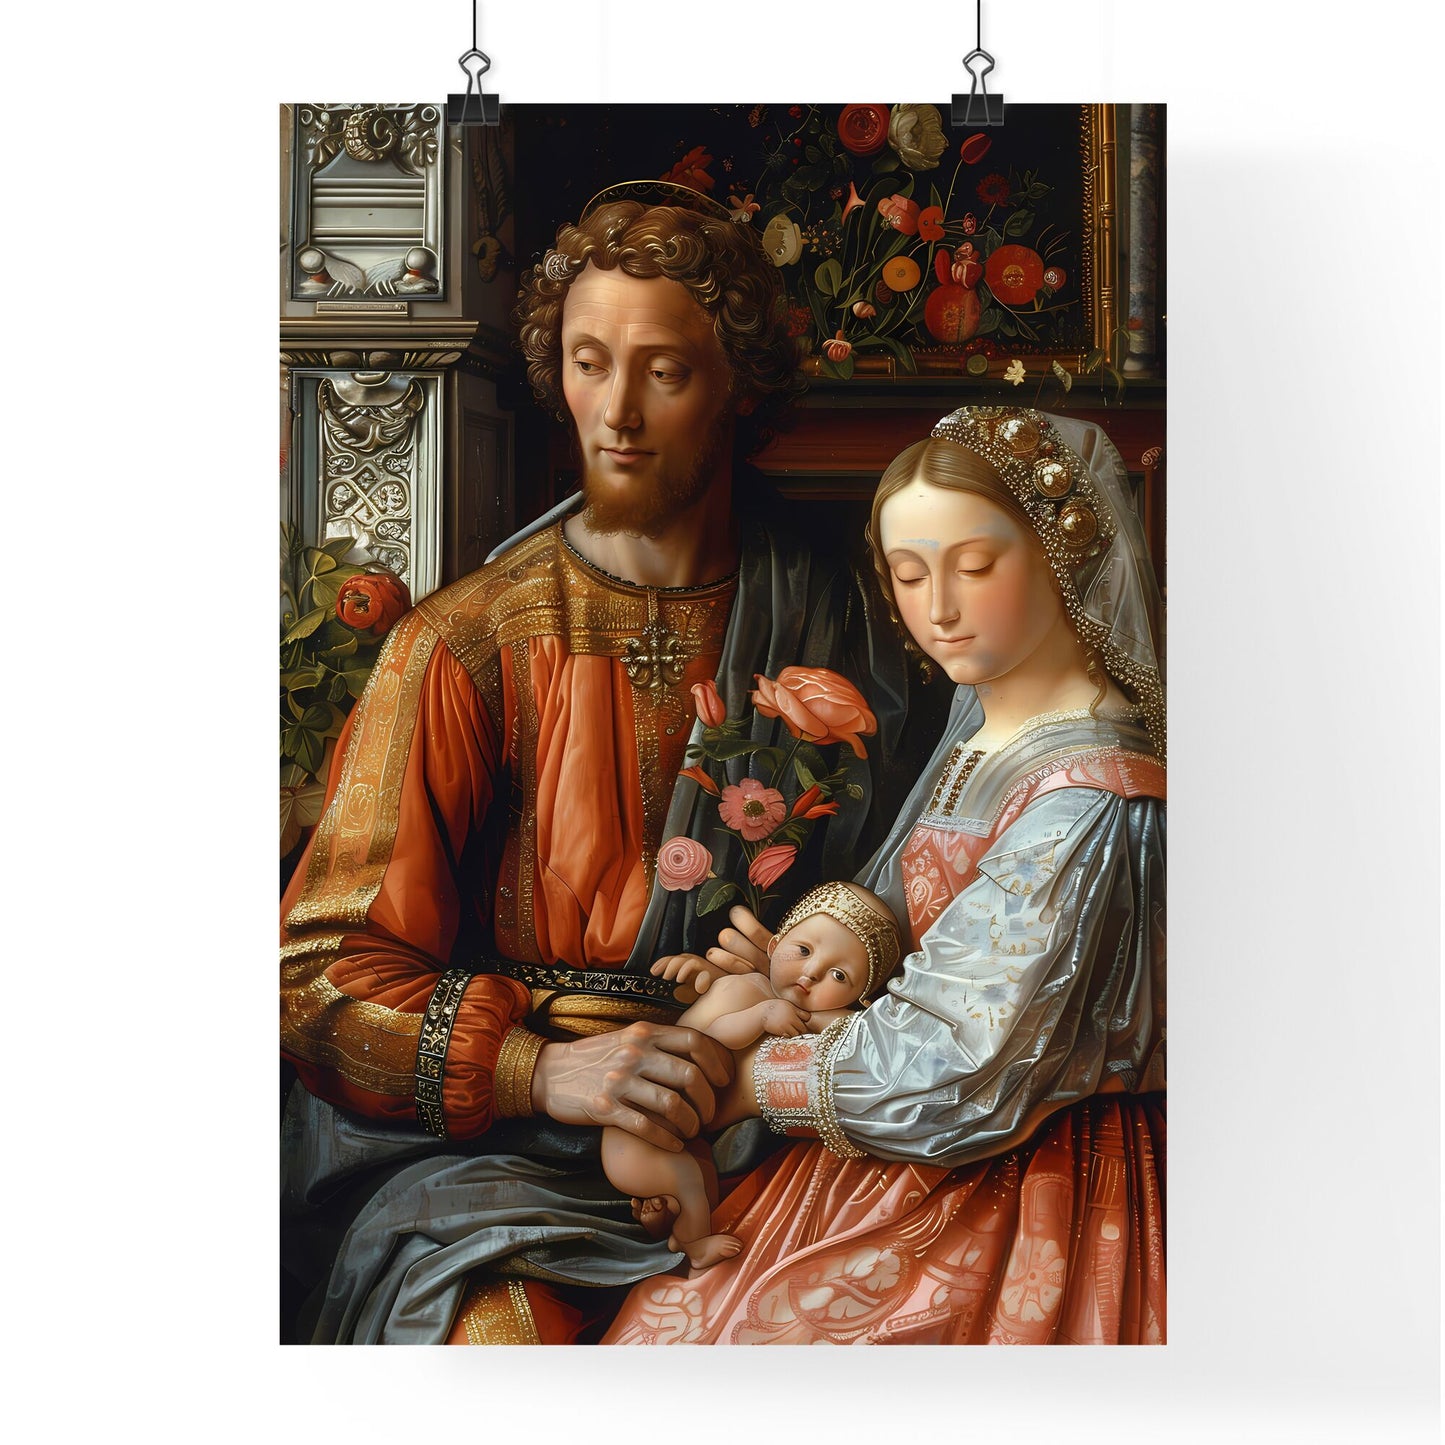 Renaissance Art Print: Family Portrait Painting with Man, Woman, and Baby Default Title